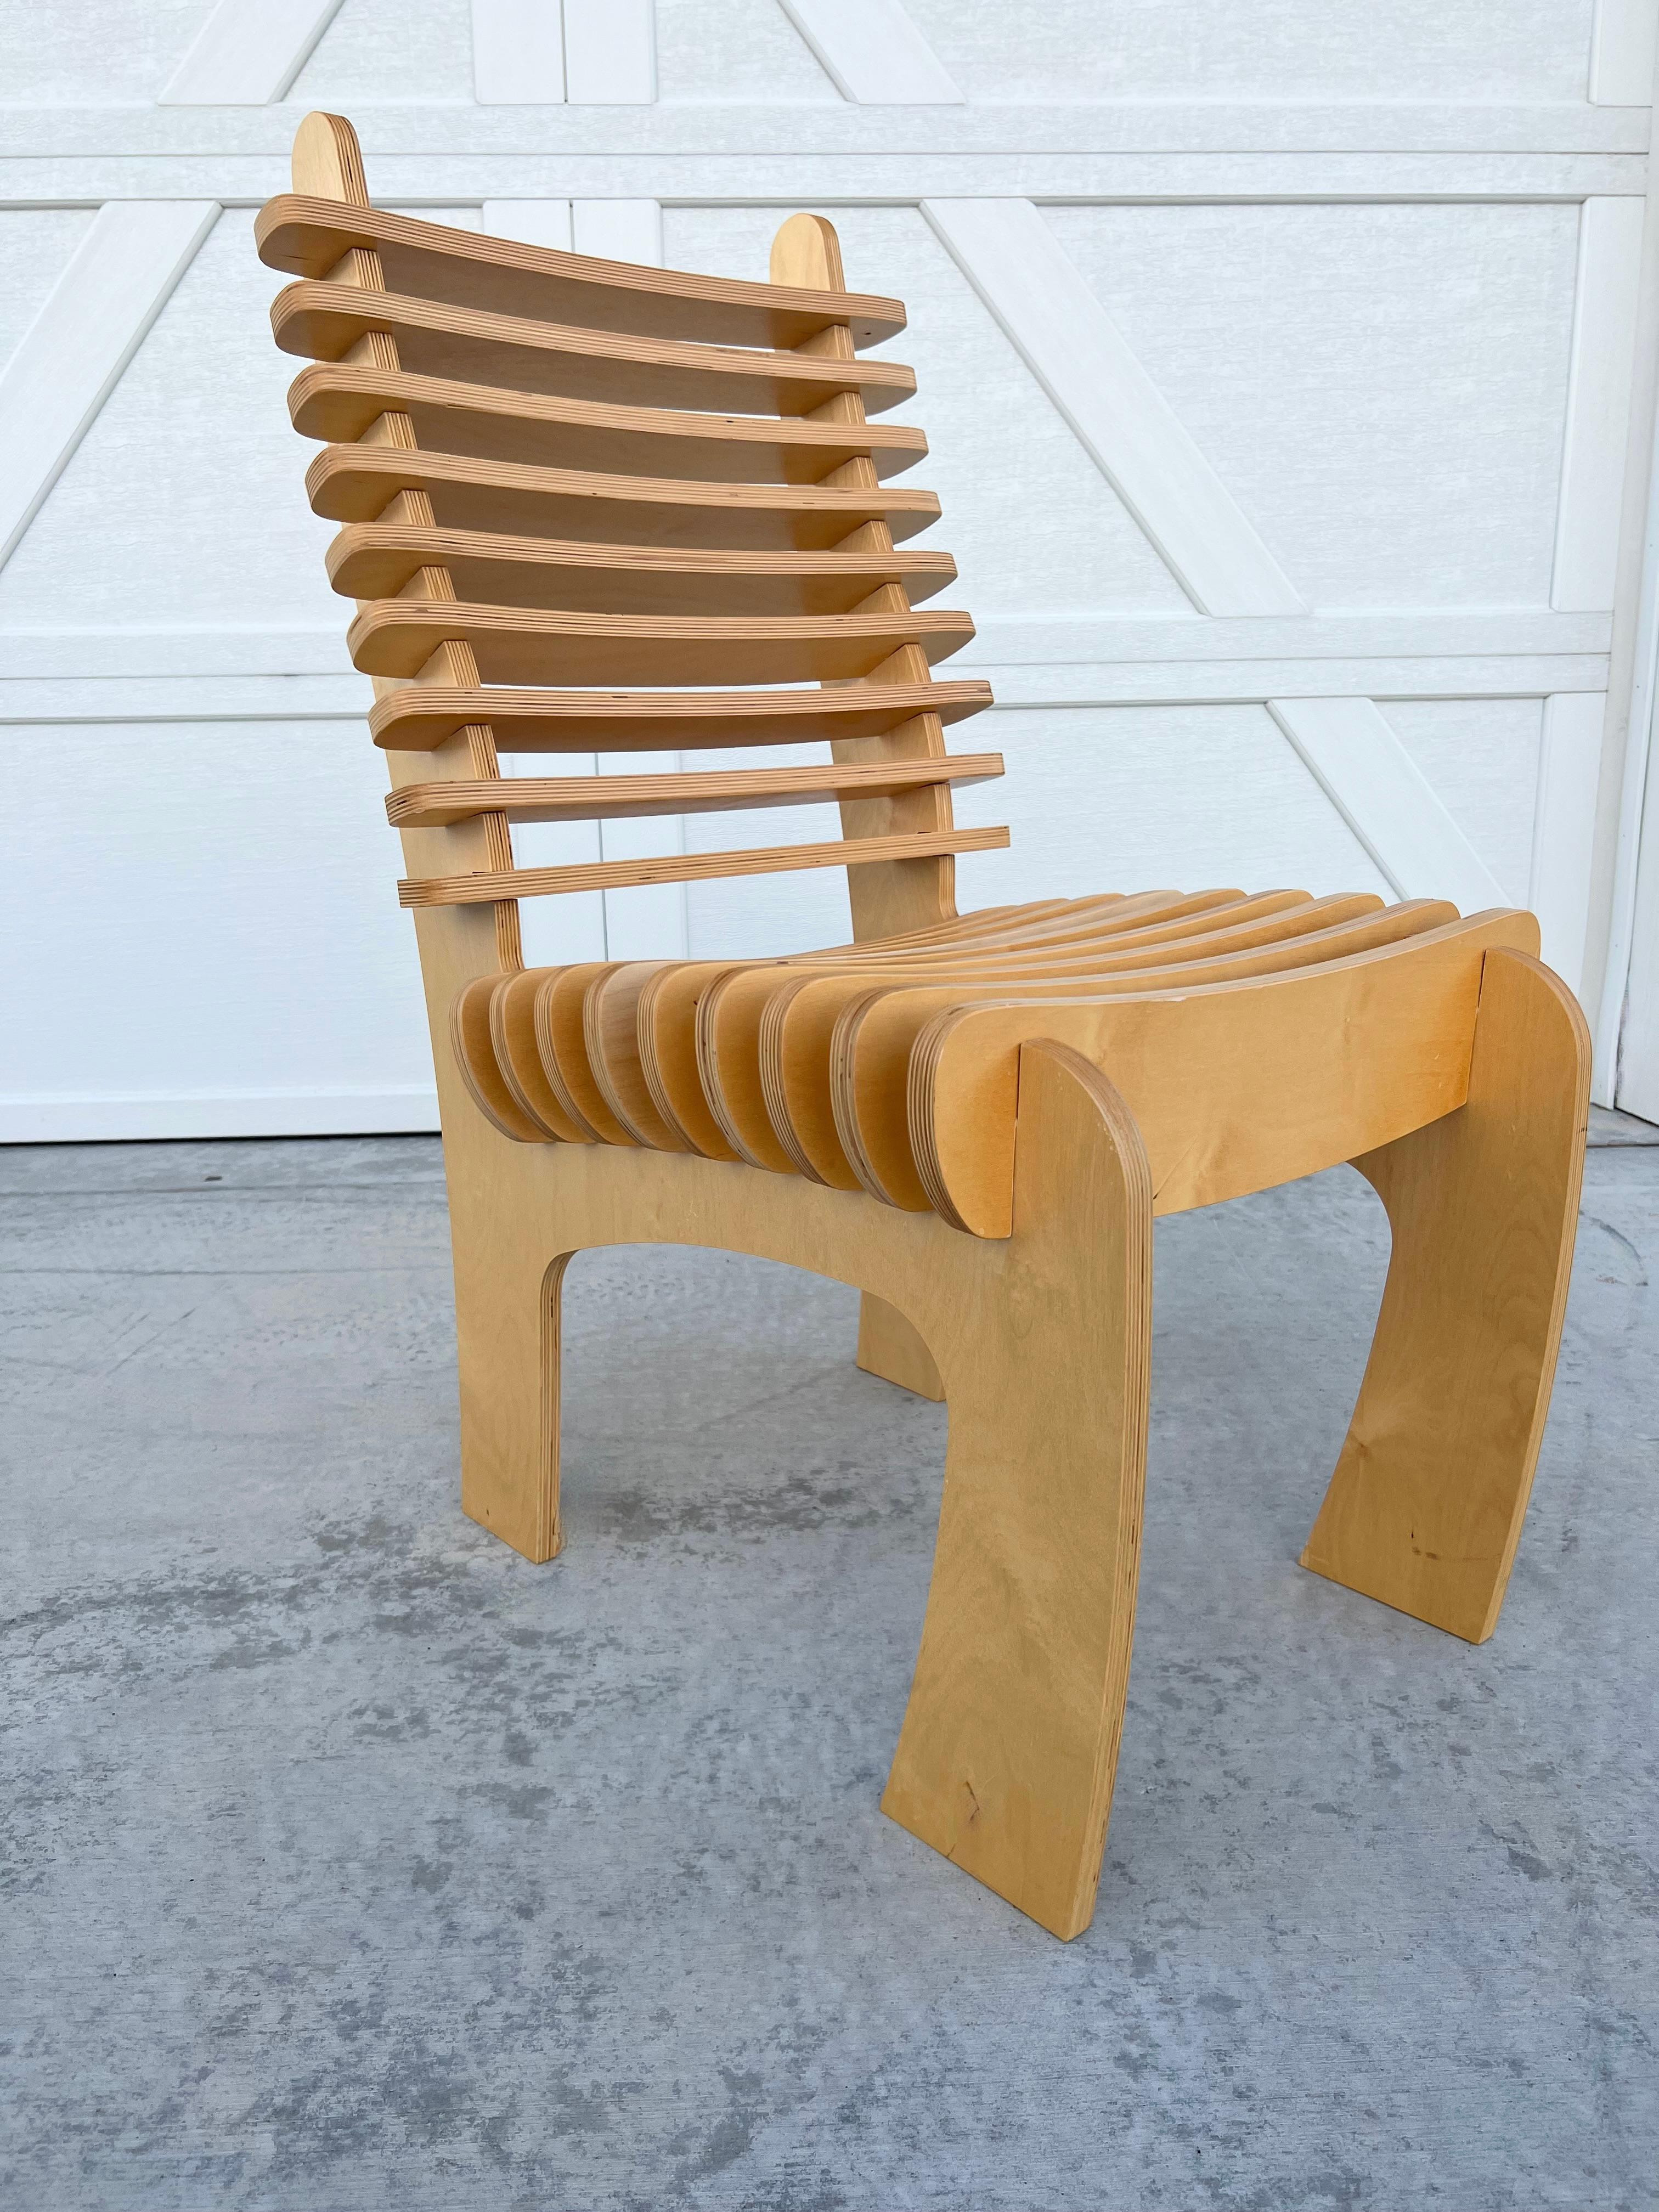 Modern Blond Plywood Minimalist Slat Side Chair Art Architectural Piece In Good Condition For Sale In Draper, UT